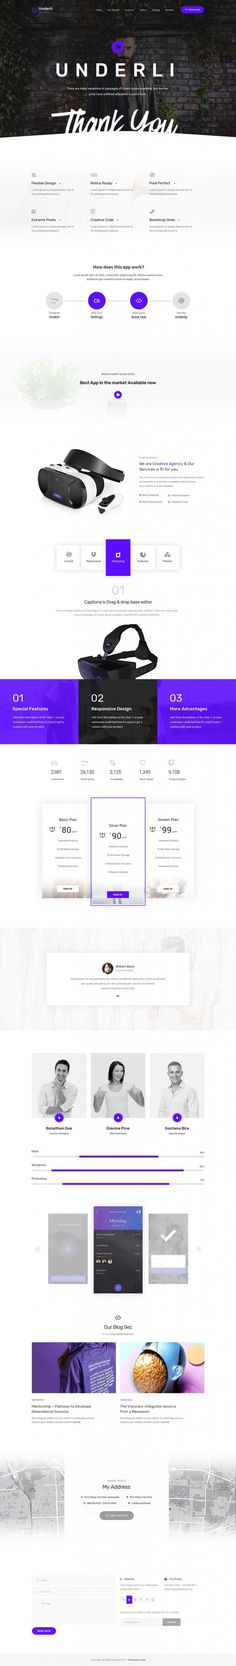 App Landing Page & Product Showcase